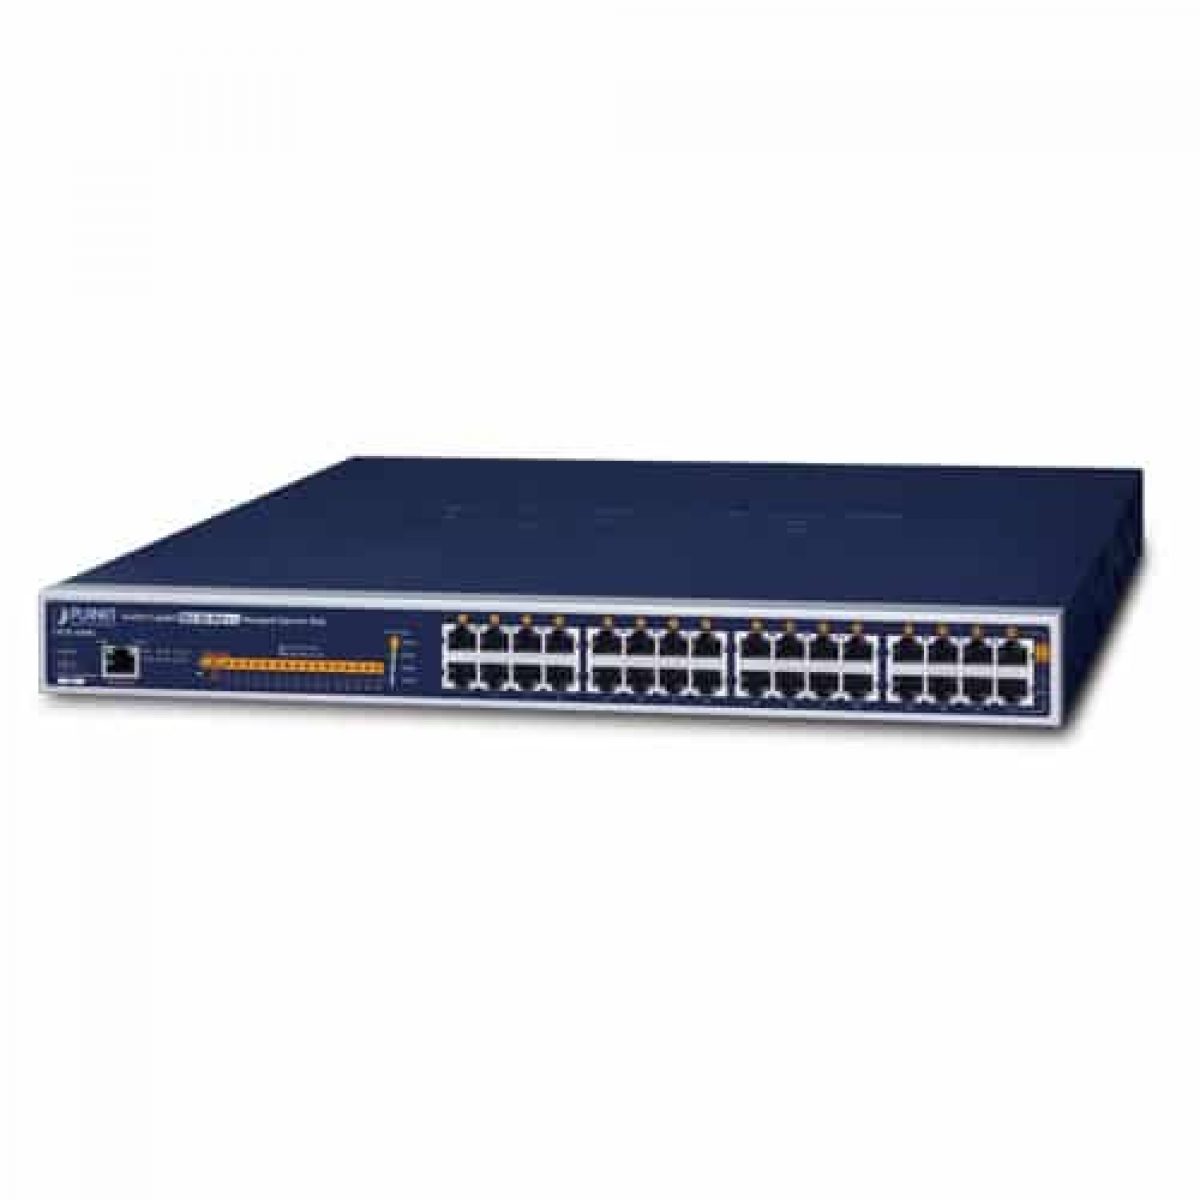 IGS-1600T Industrial 16-Port 10/100/1000T Ethernet Switch - Planet  Technology USA